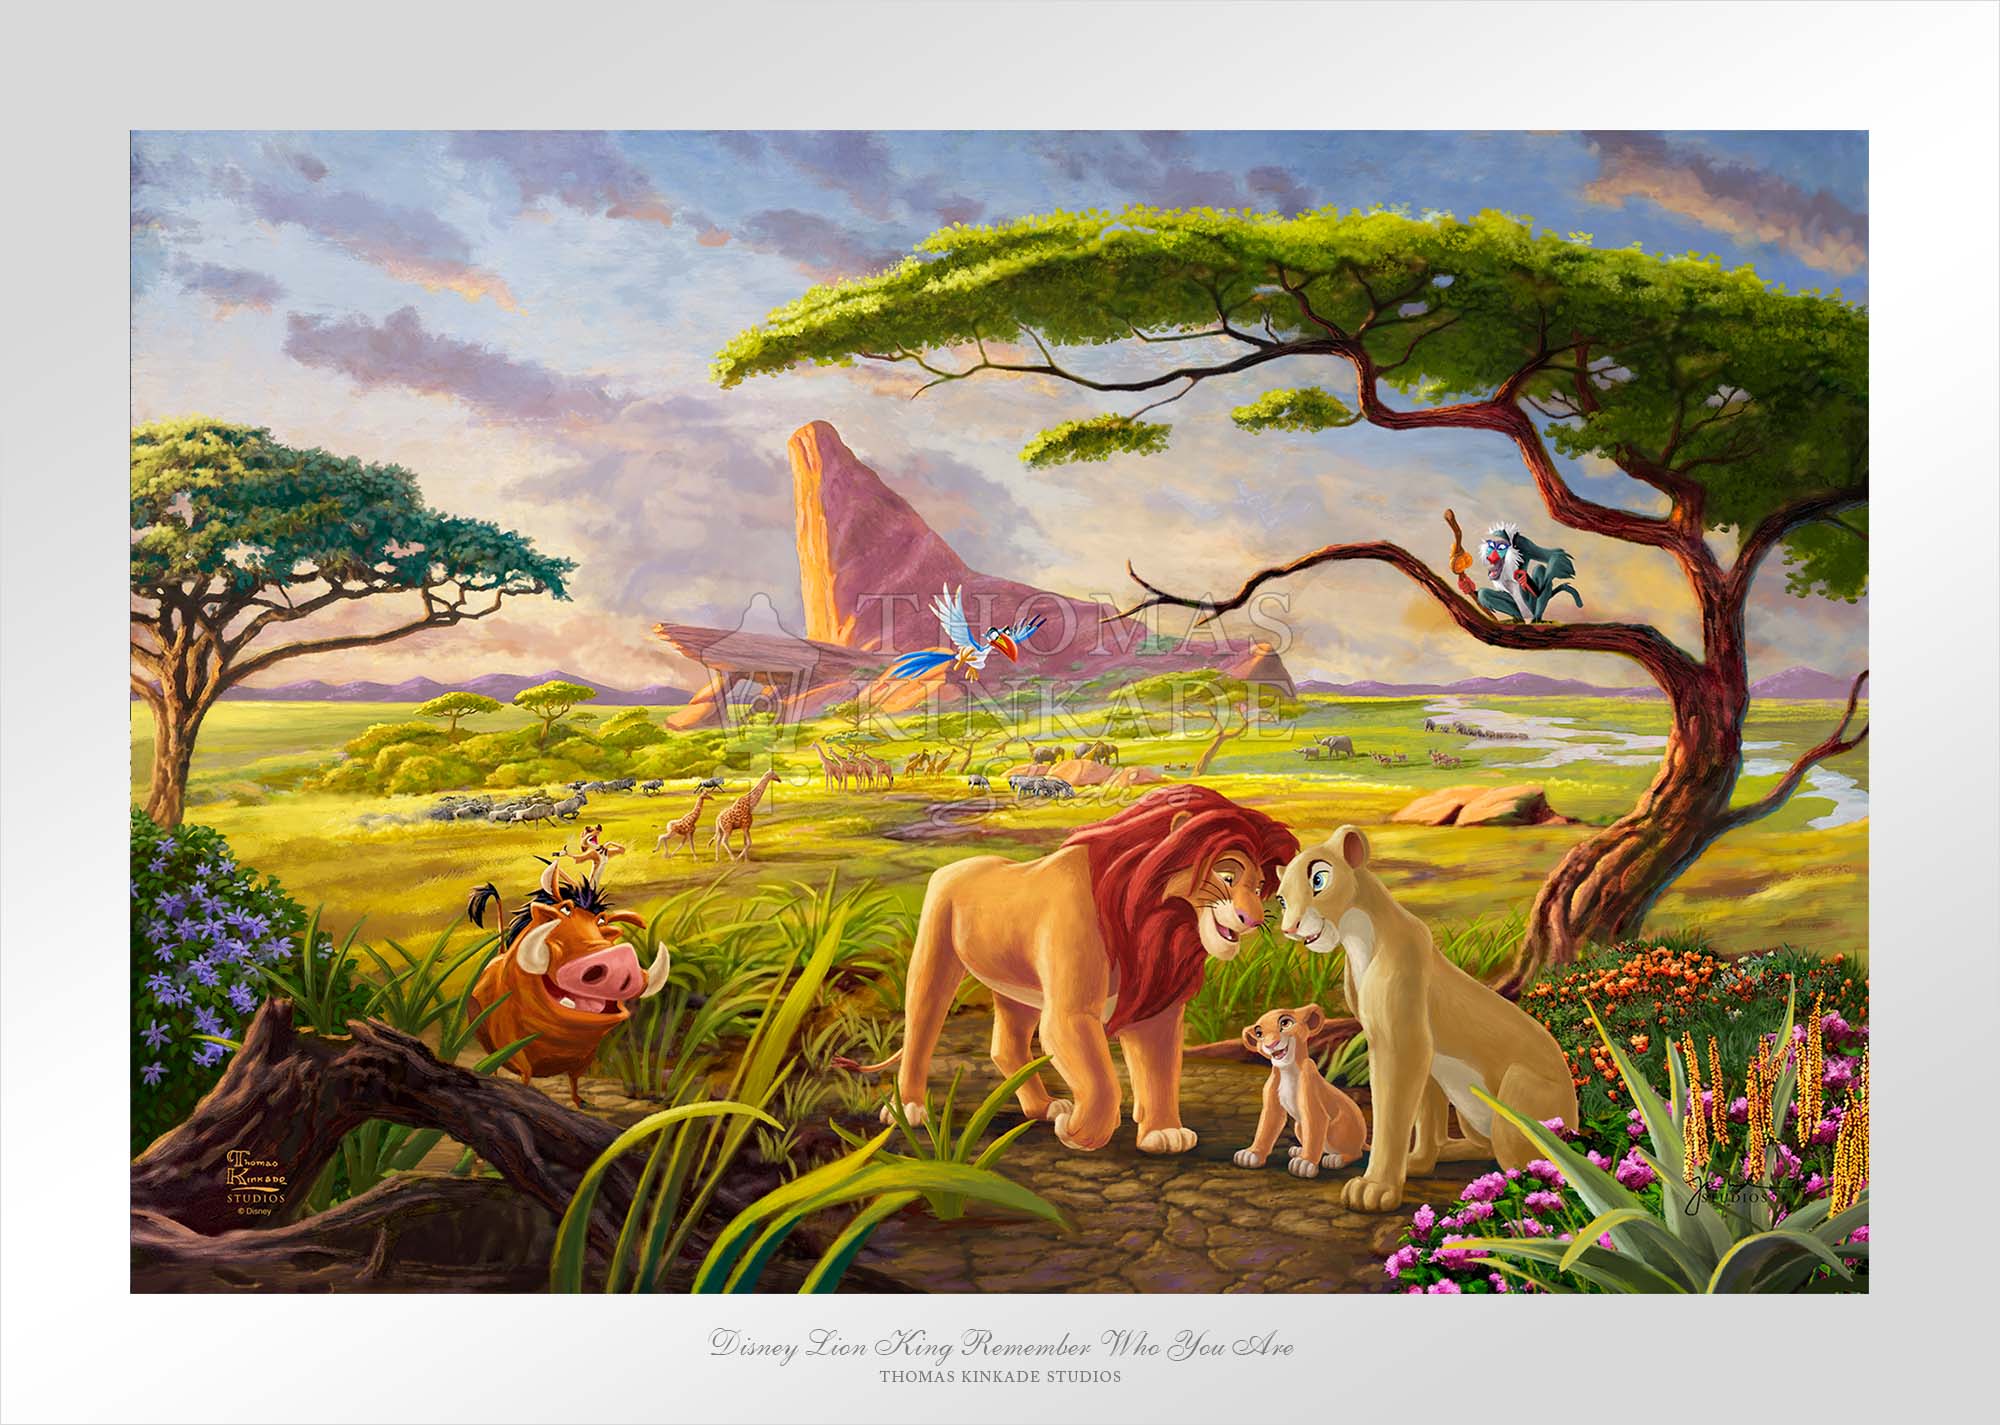 Featuring Africa's lush and colorful plain stretches far behind Kiara, Nala, and Simba as the circle of life continues in harmony and balance. - Unframed Paper